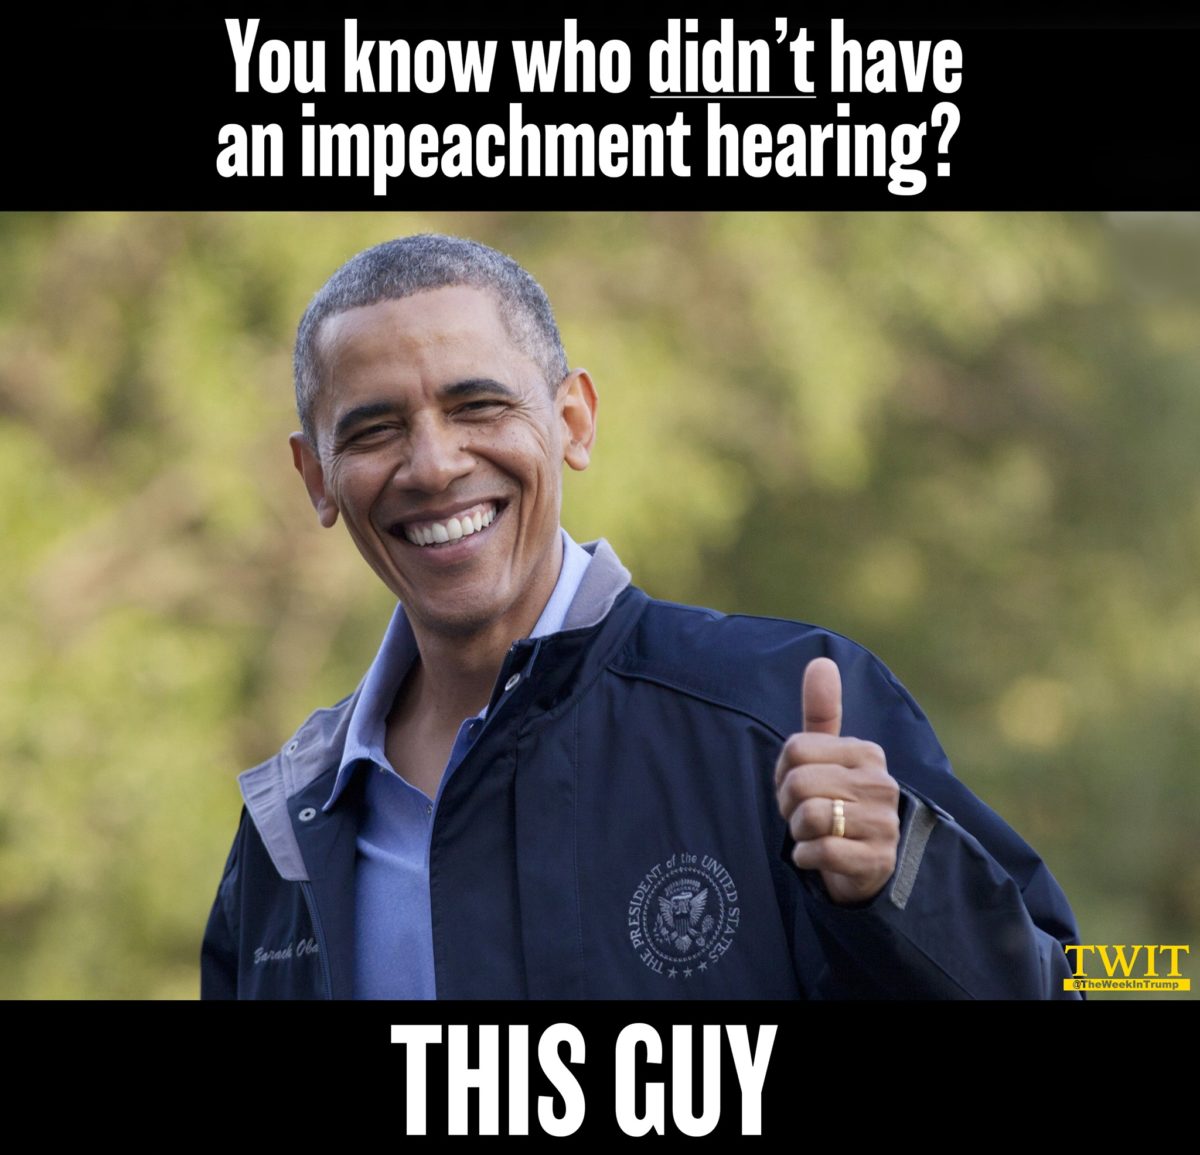 obama with thumbs up - You know who didn't have an impeachment hearing? Eclinis Presin Ed Sta Hl Twit The Weekin Trump This Guy